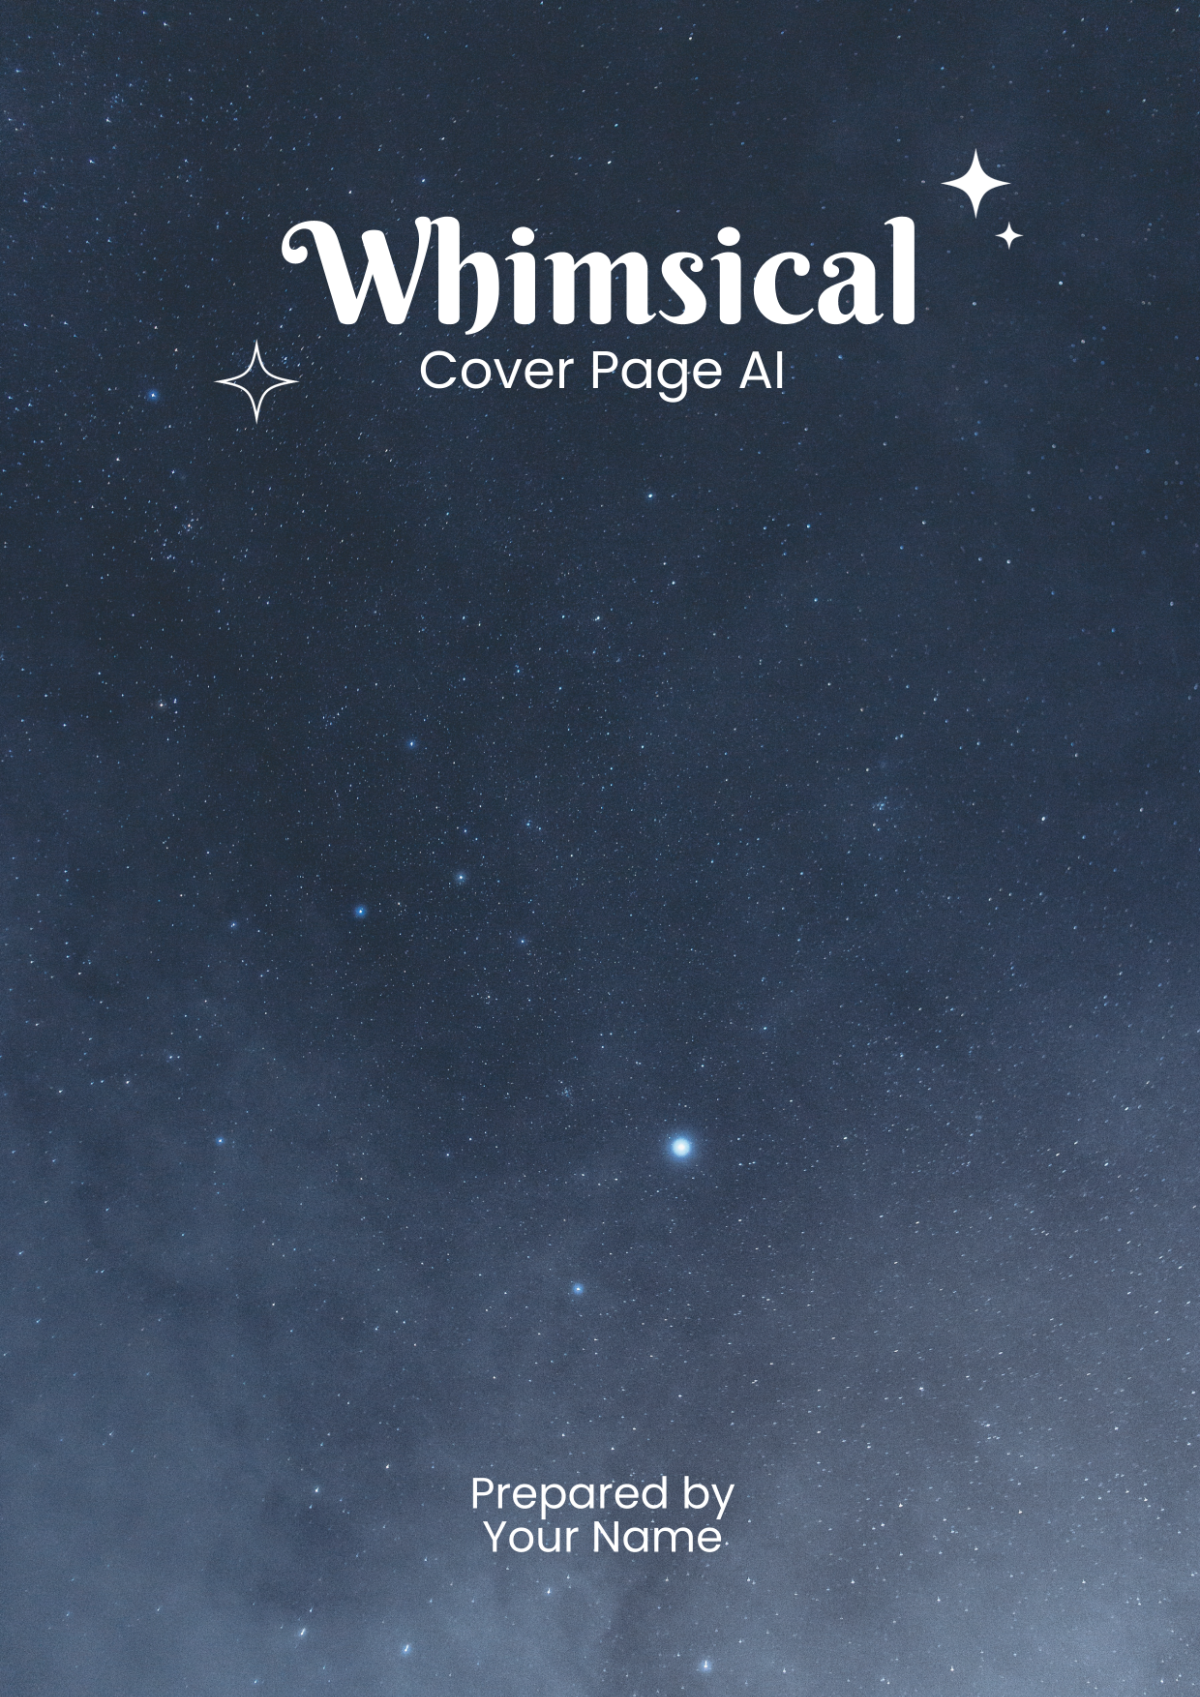 Whimsical Cover Page AI Template